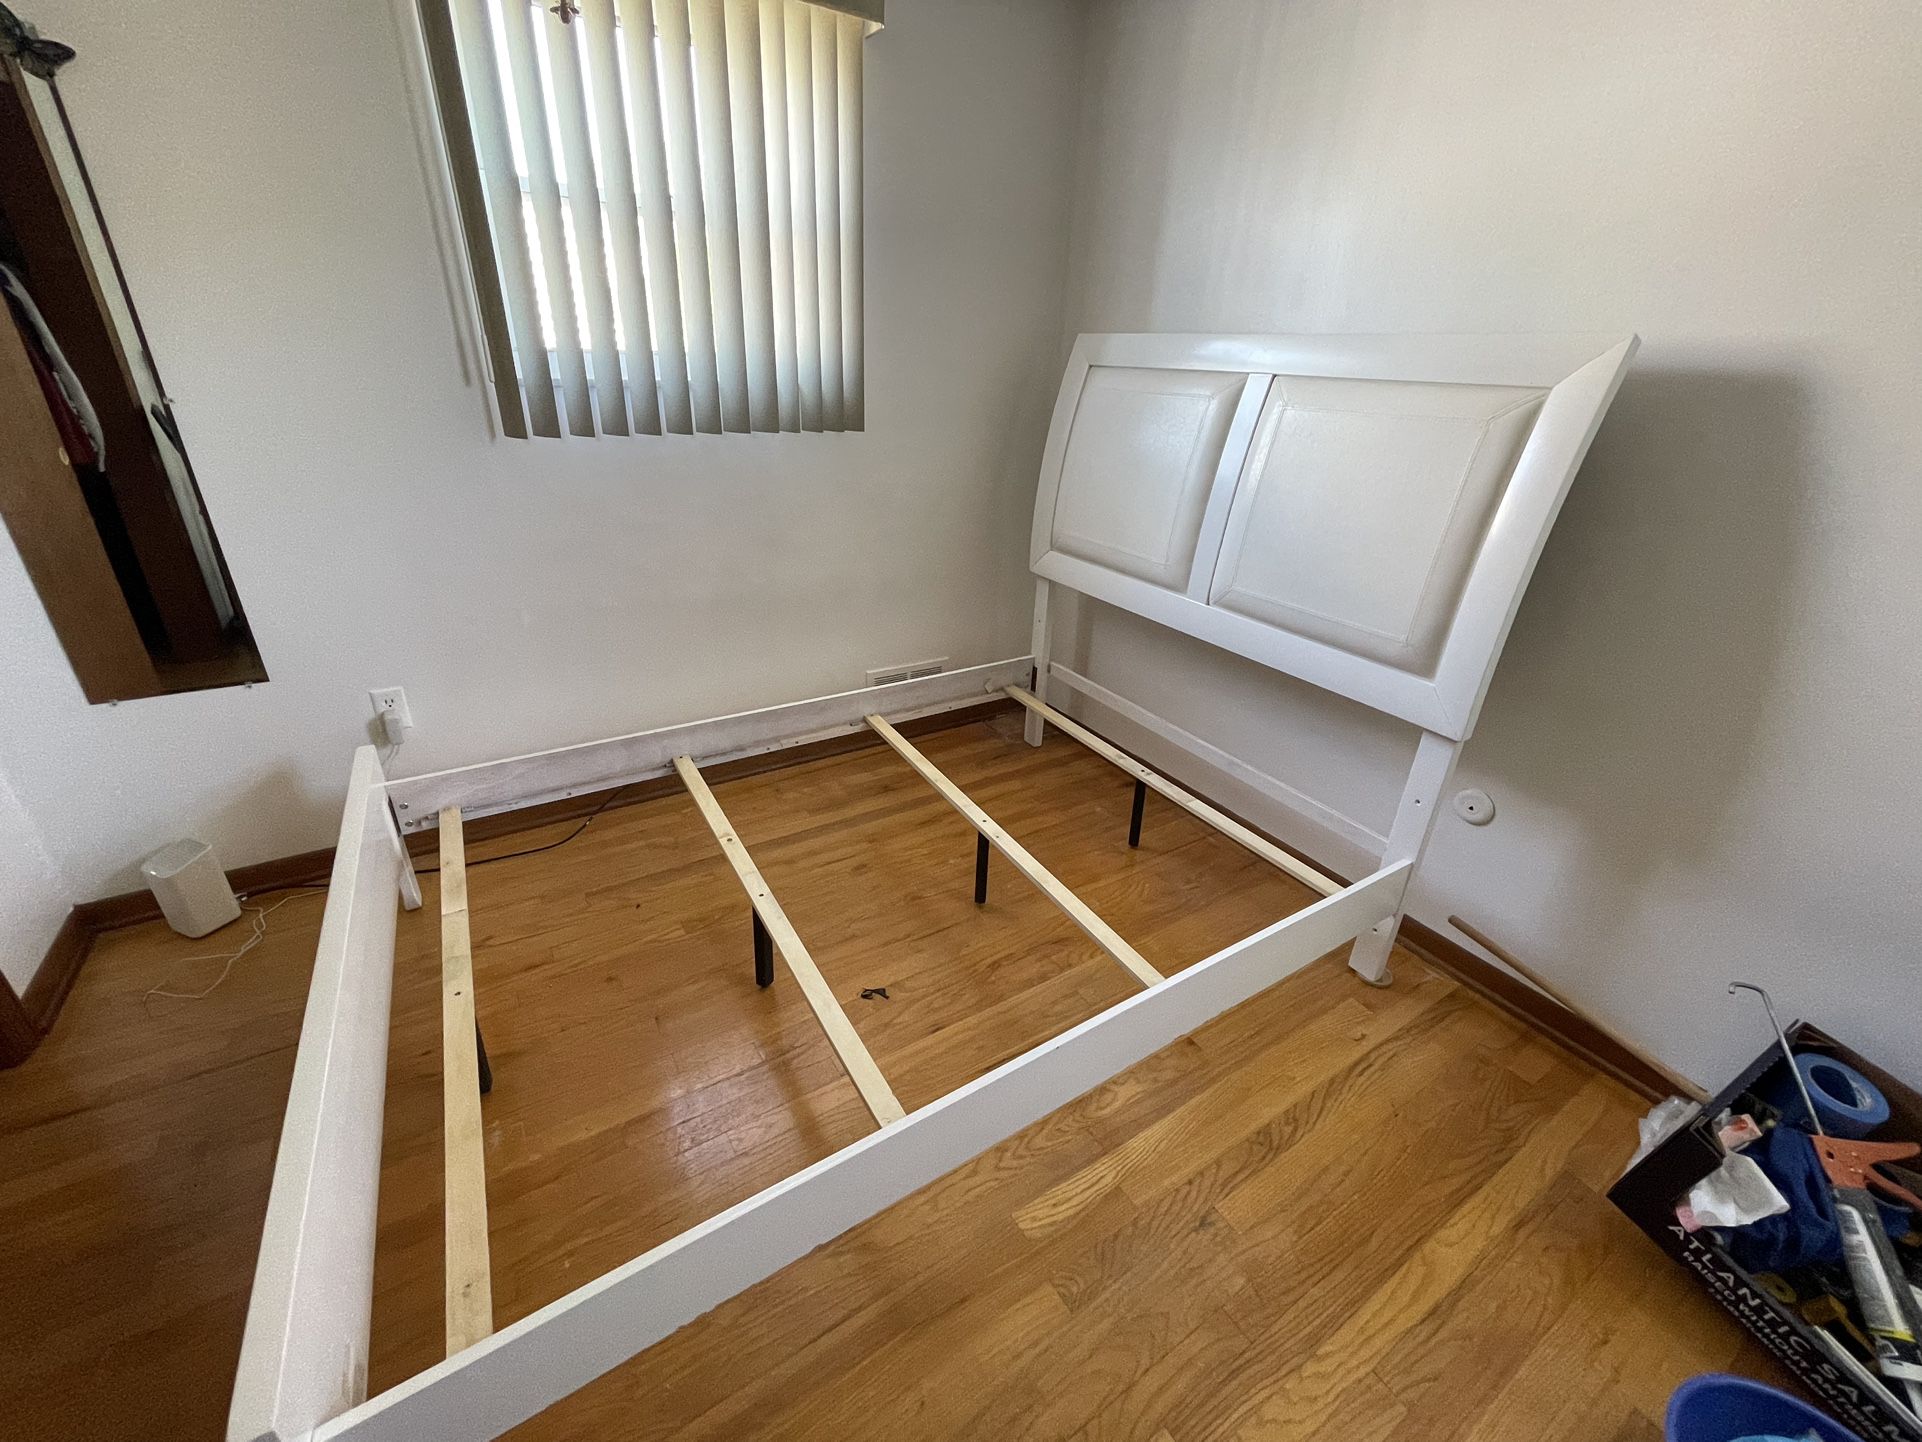 Full Bed Frame With Spring Box